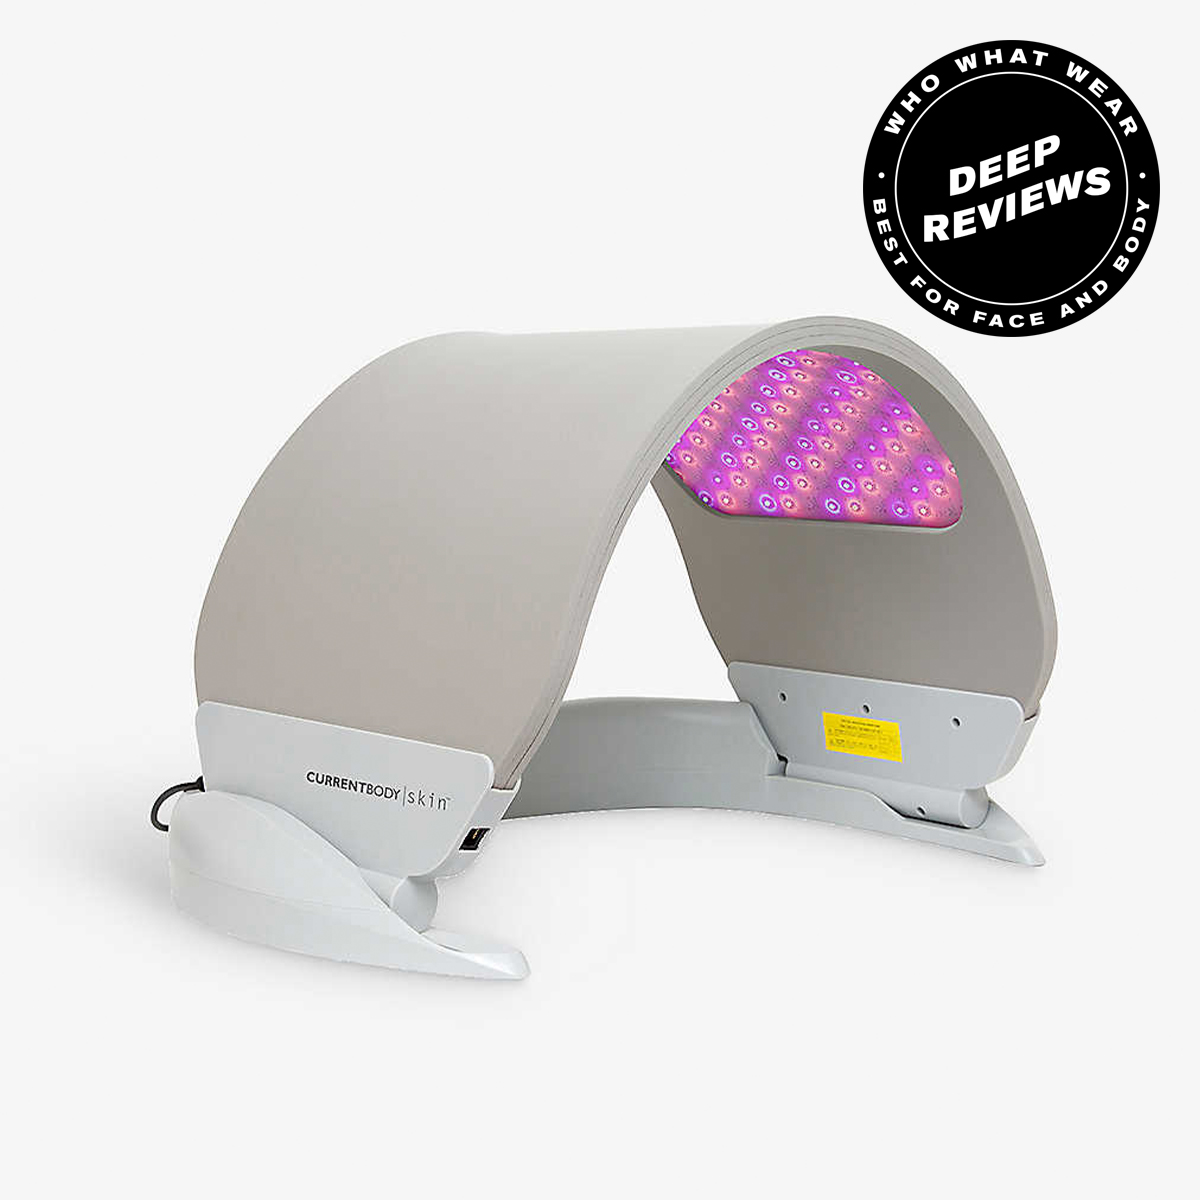 Currentbody Skin Dermalux Flex Md Led Light Therapy Device